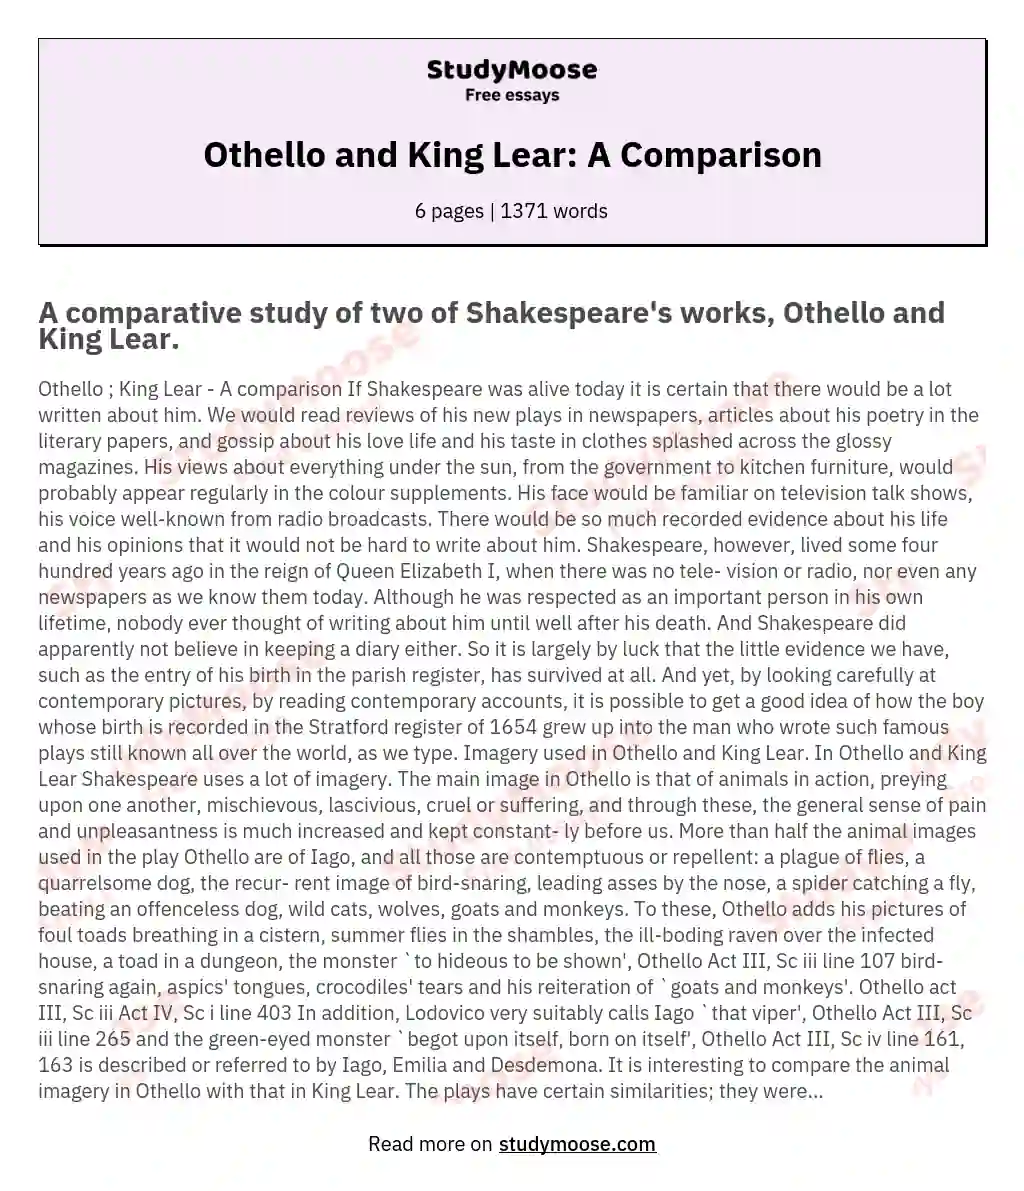 Othello and King Lear: A Comparison essay